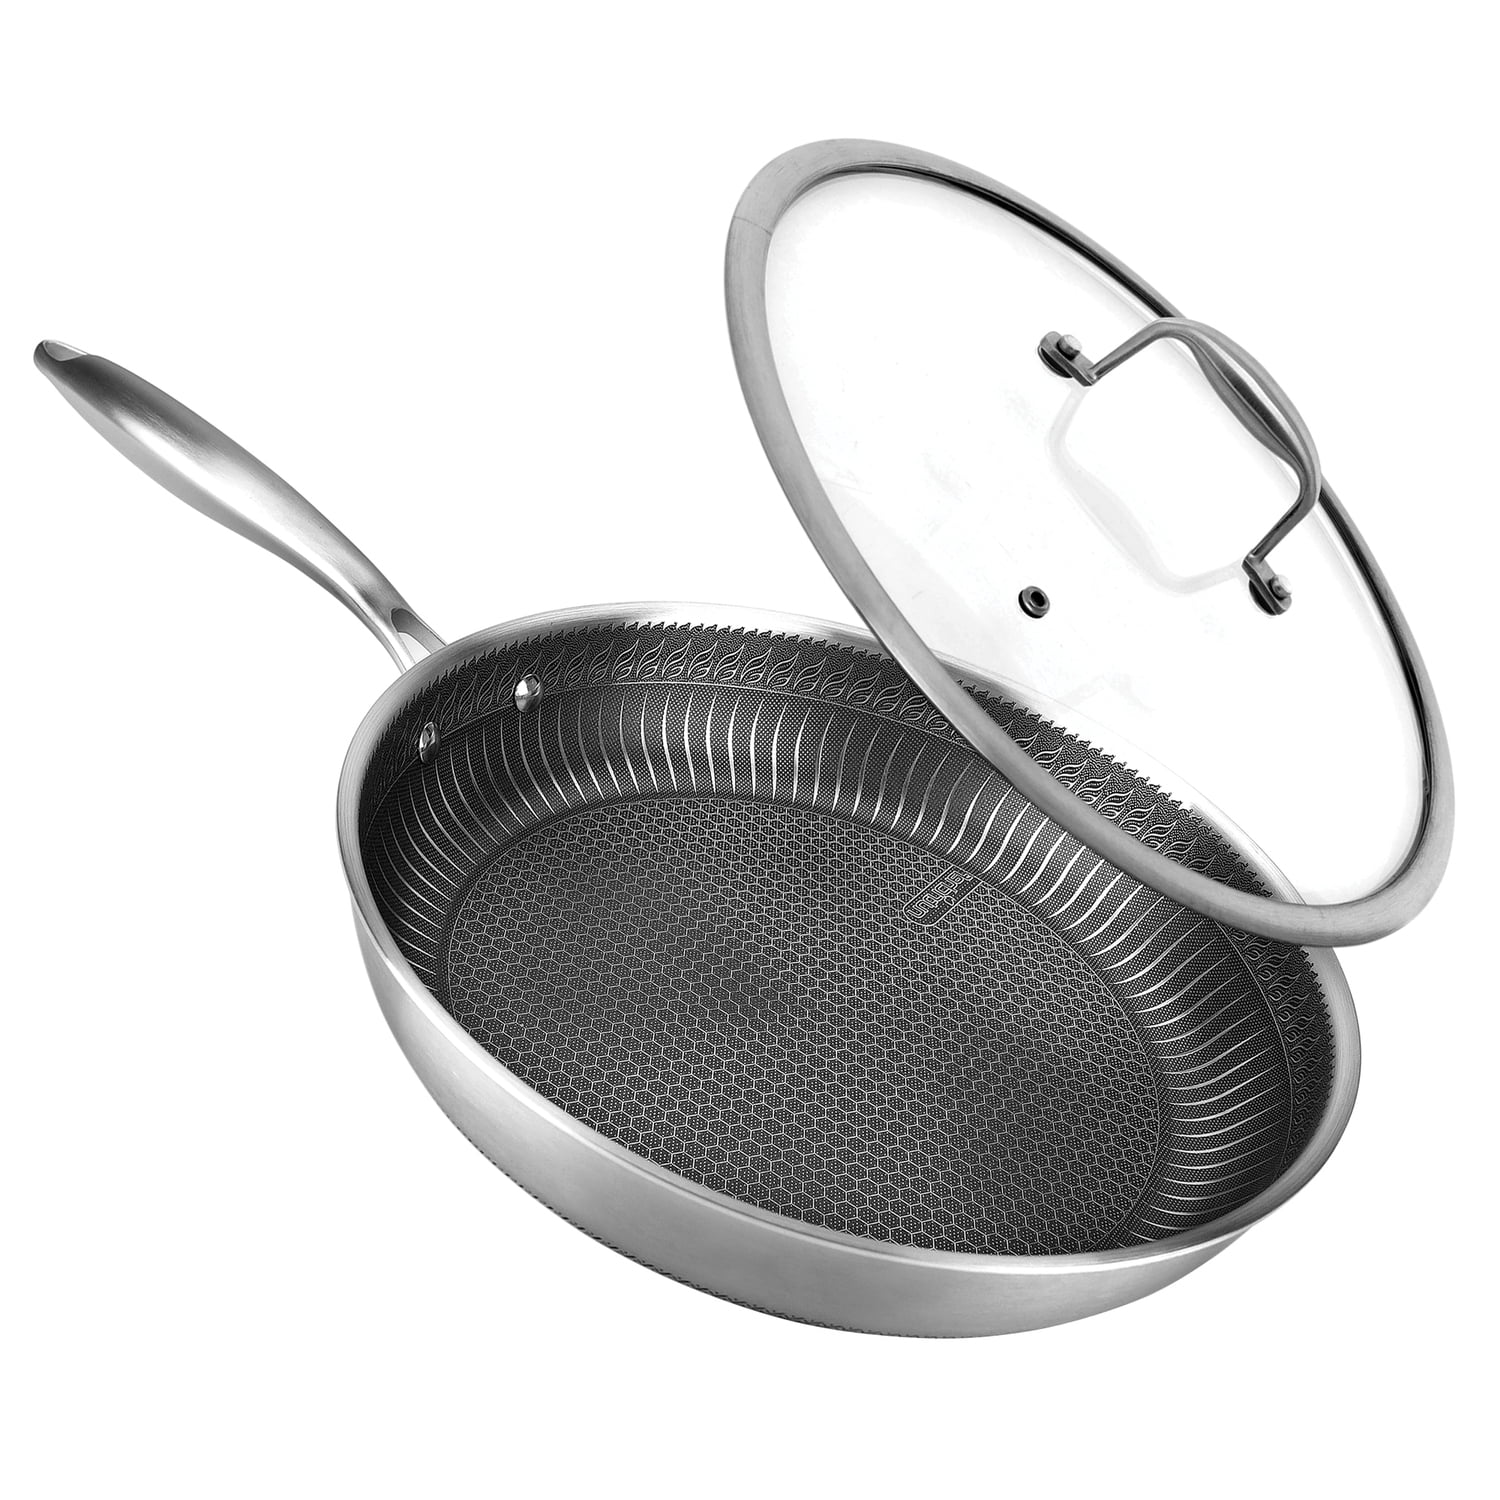 FlavCity 12 in Tri-Ply Clad Fry Pan w/ Ceramic Interior